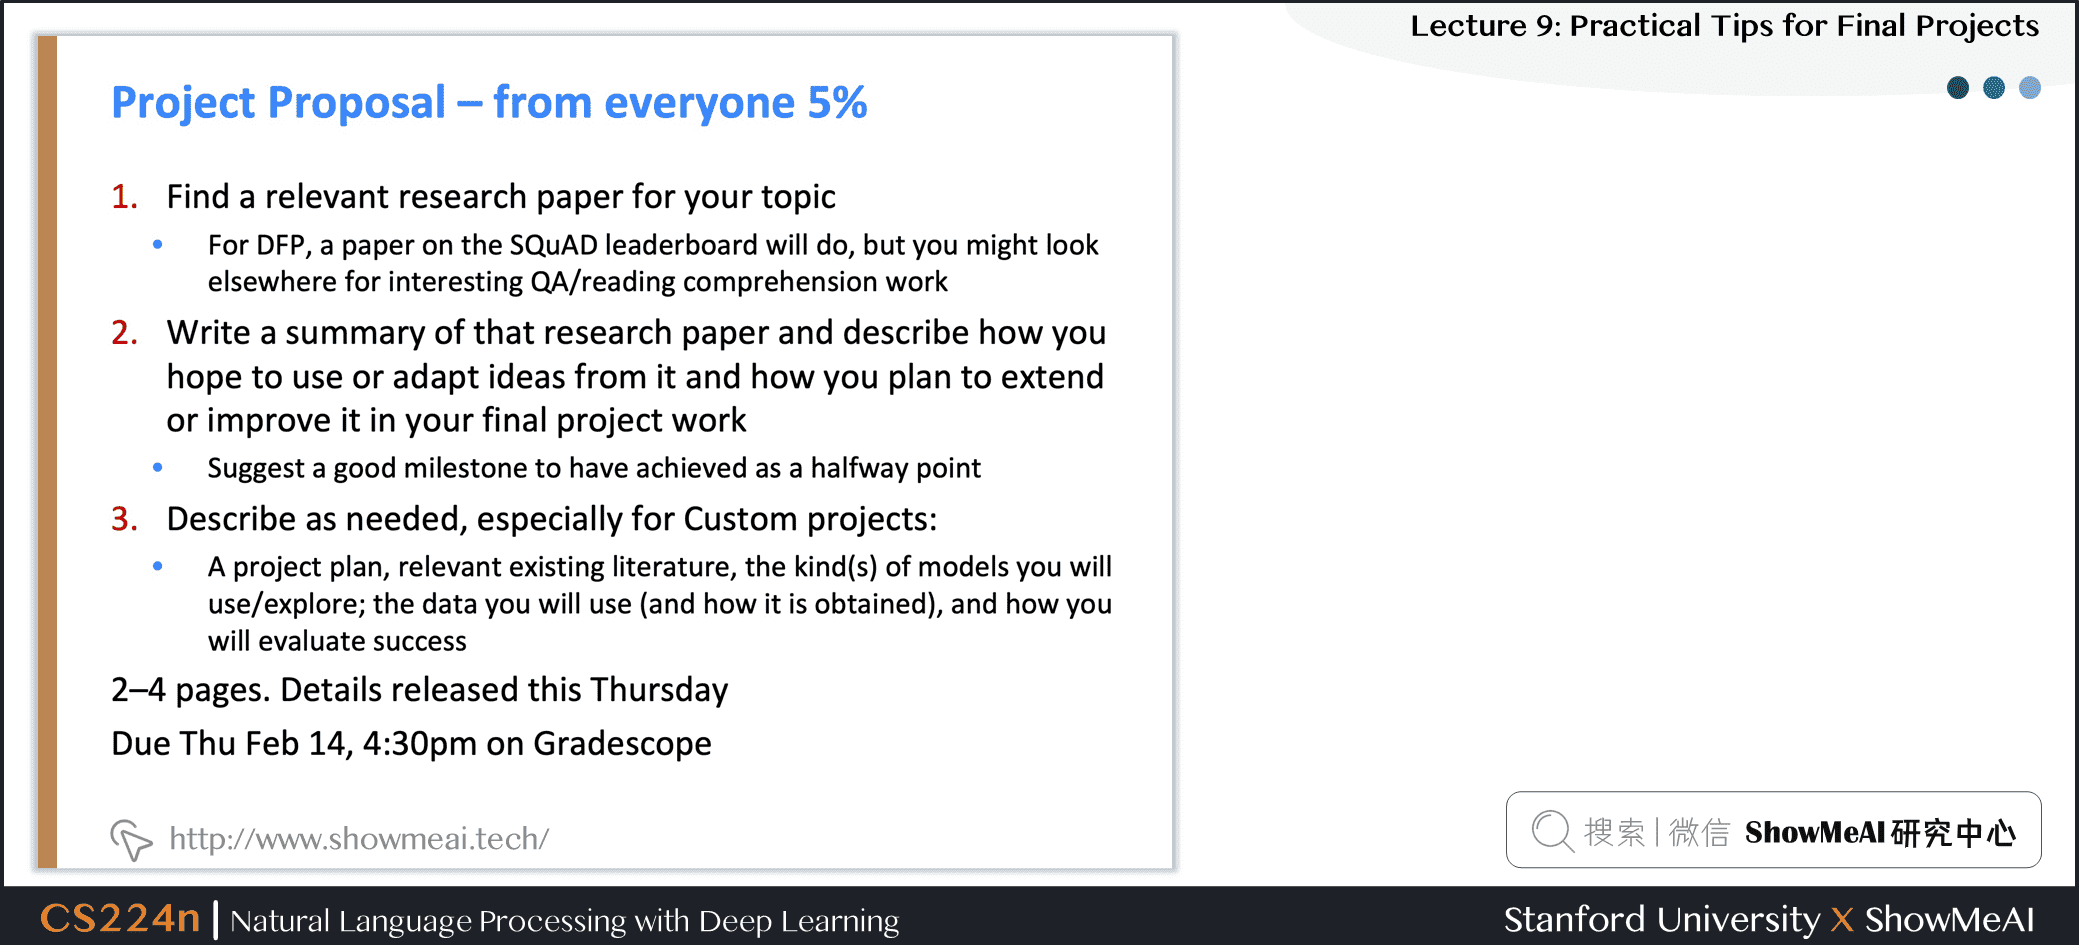 Project Proposal – from everyone 5%